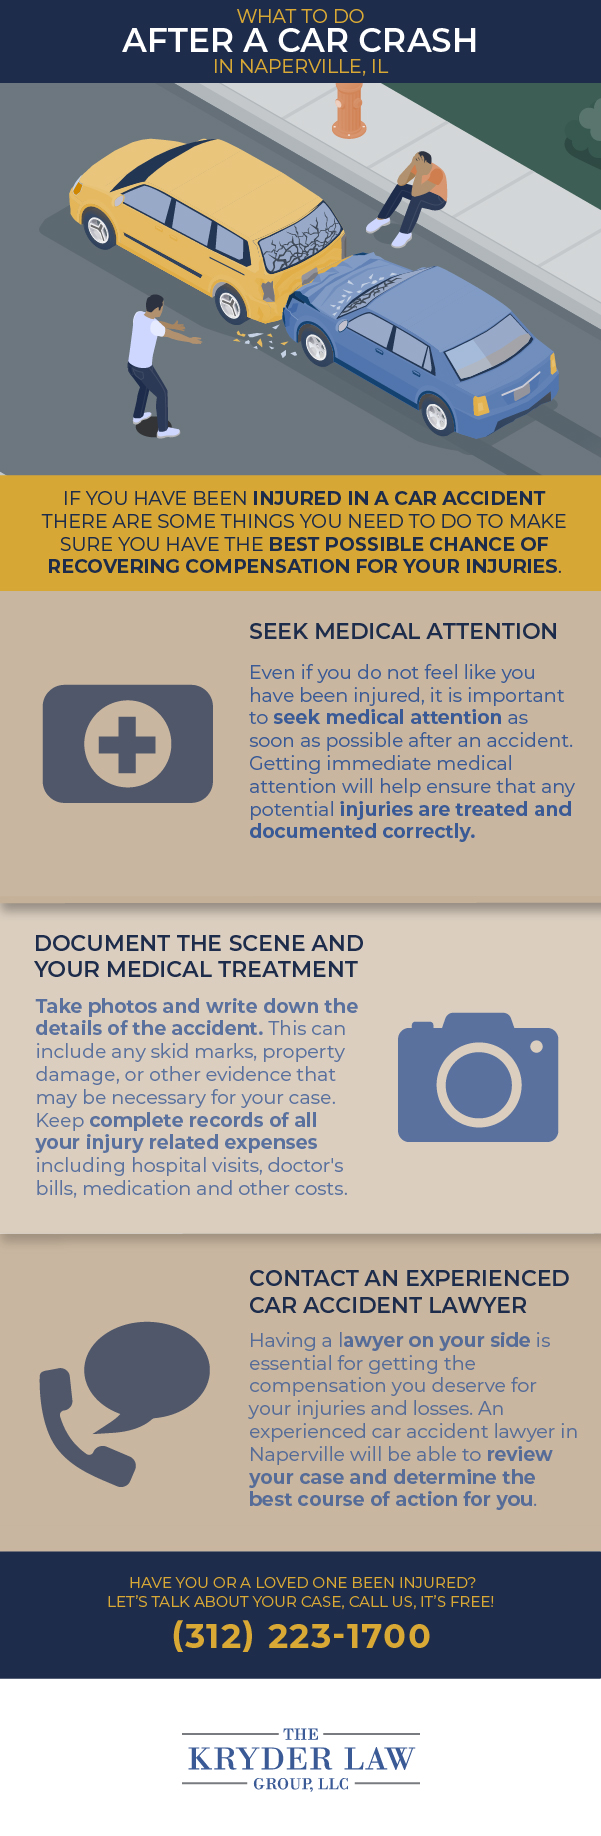 The Benefits of Hiring a Naperville Car Accident Lawyer Infographic